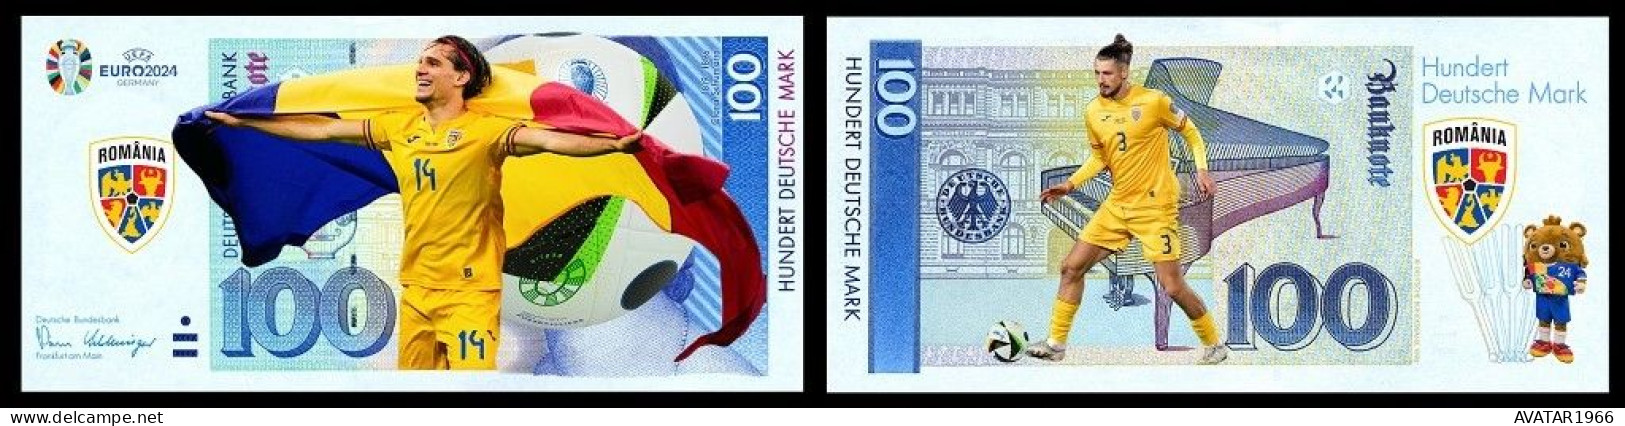 UEFA European Football Championship 2024 qualified country Romania 8 pieces Germany fantasy paper money